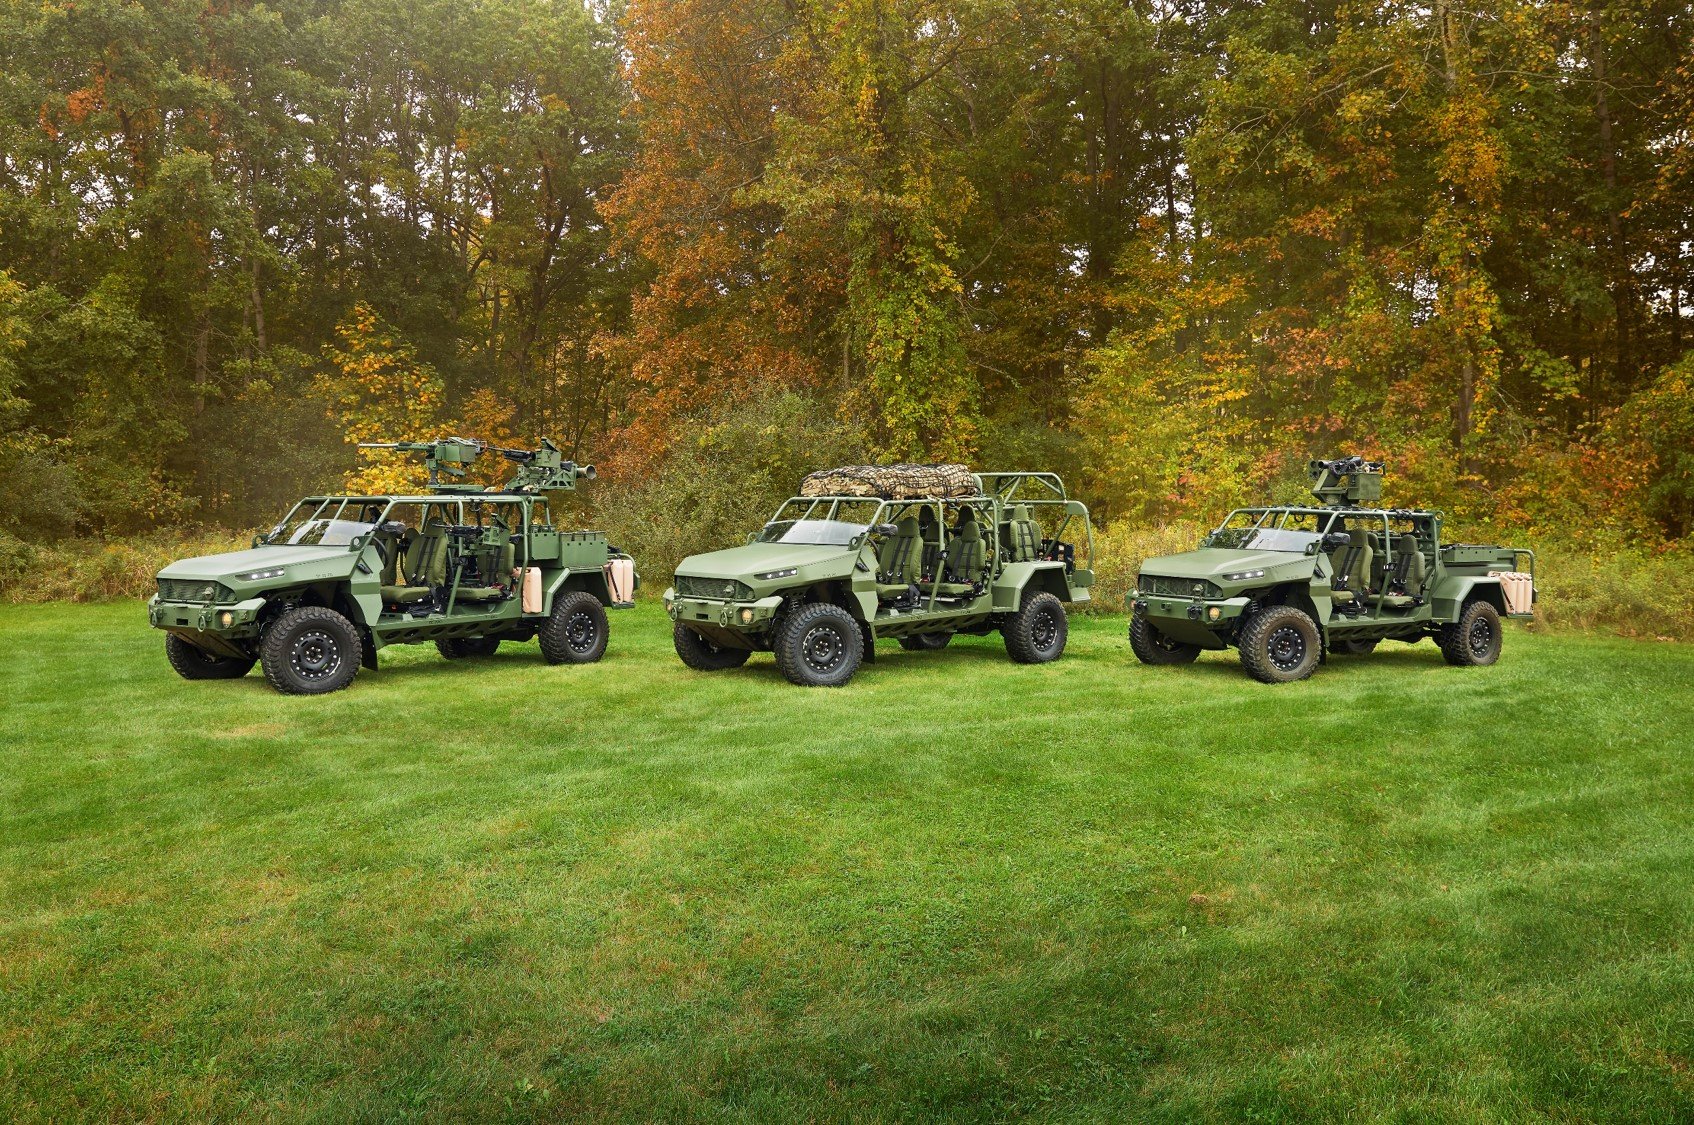 The global market for Tactical Wheeled Vehicles is booming: here’s what it takes to compete